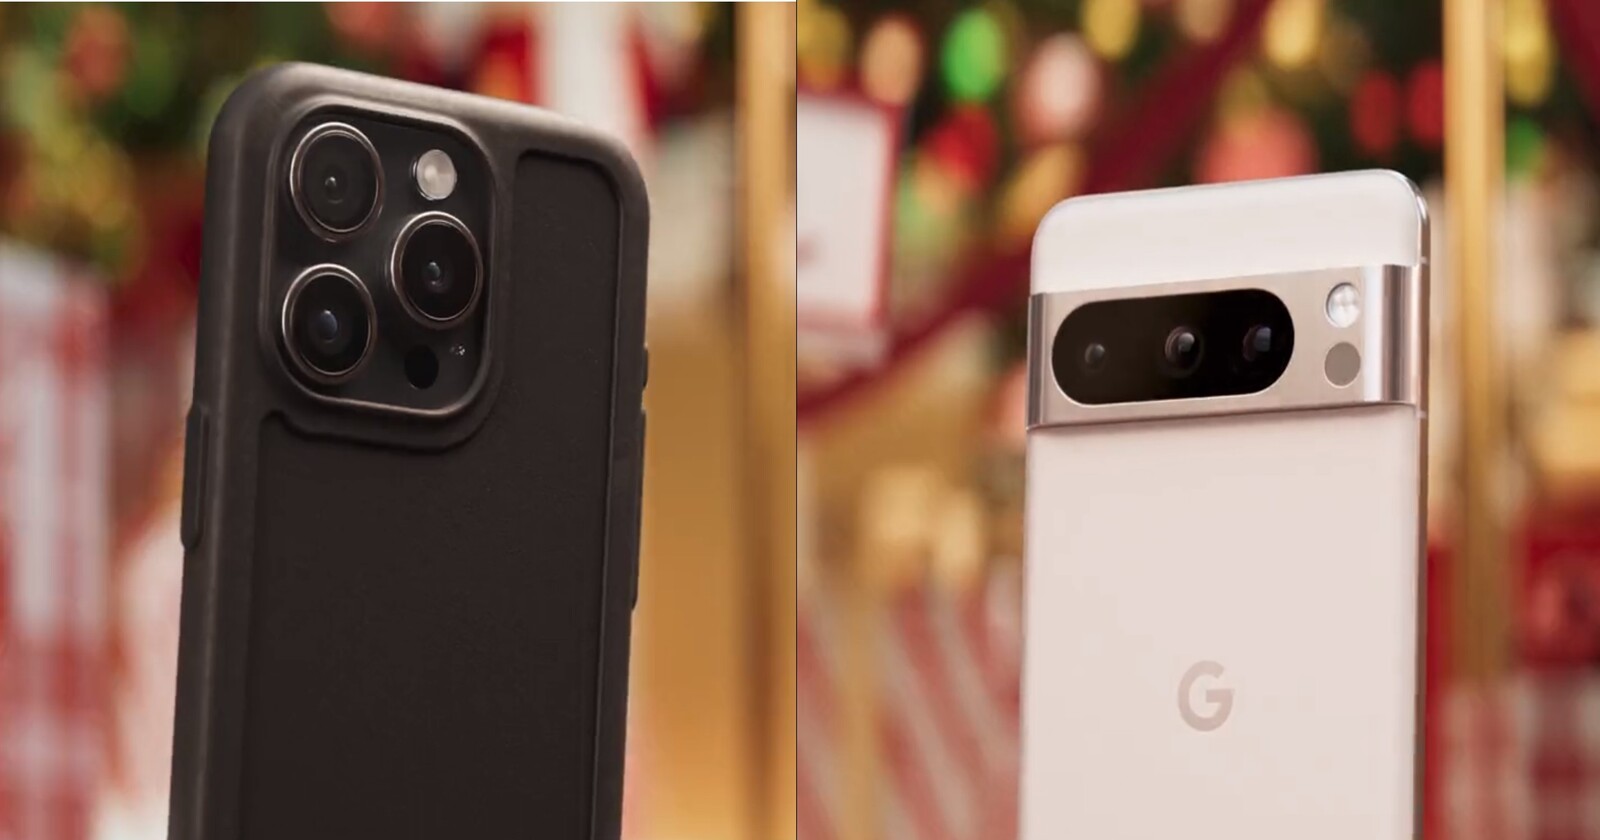 Google Pixel helps iPhone with its holiday wishlist in latest #BestPhonesForever ad